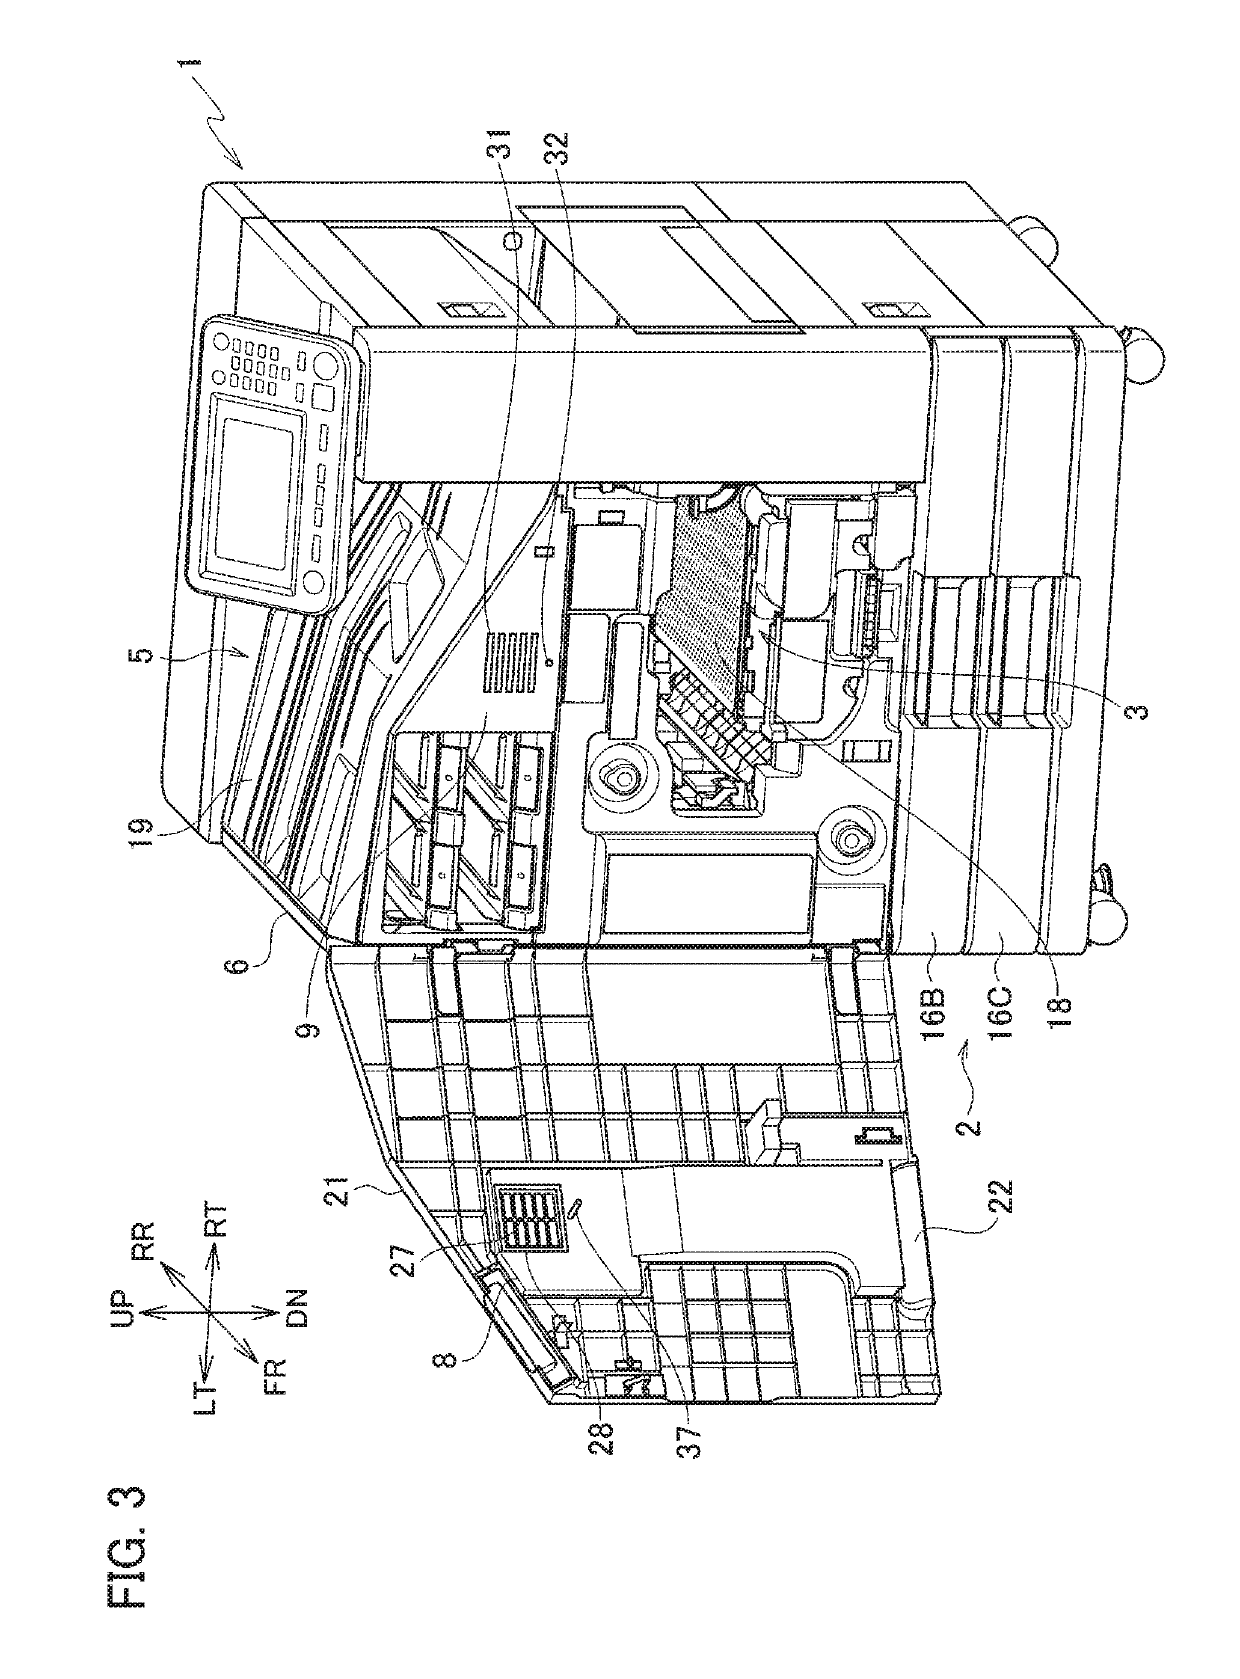 Printing apparatus with cooling fan